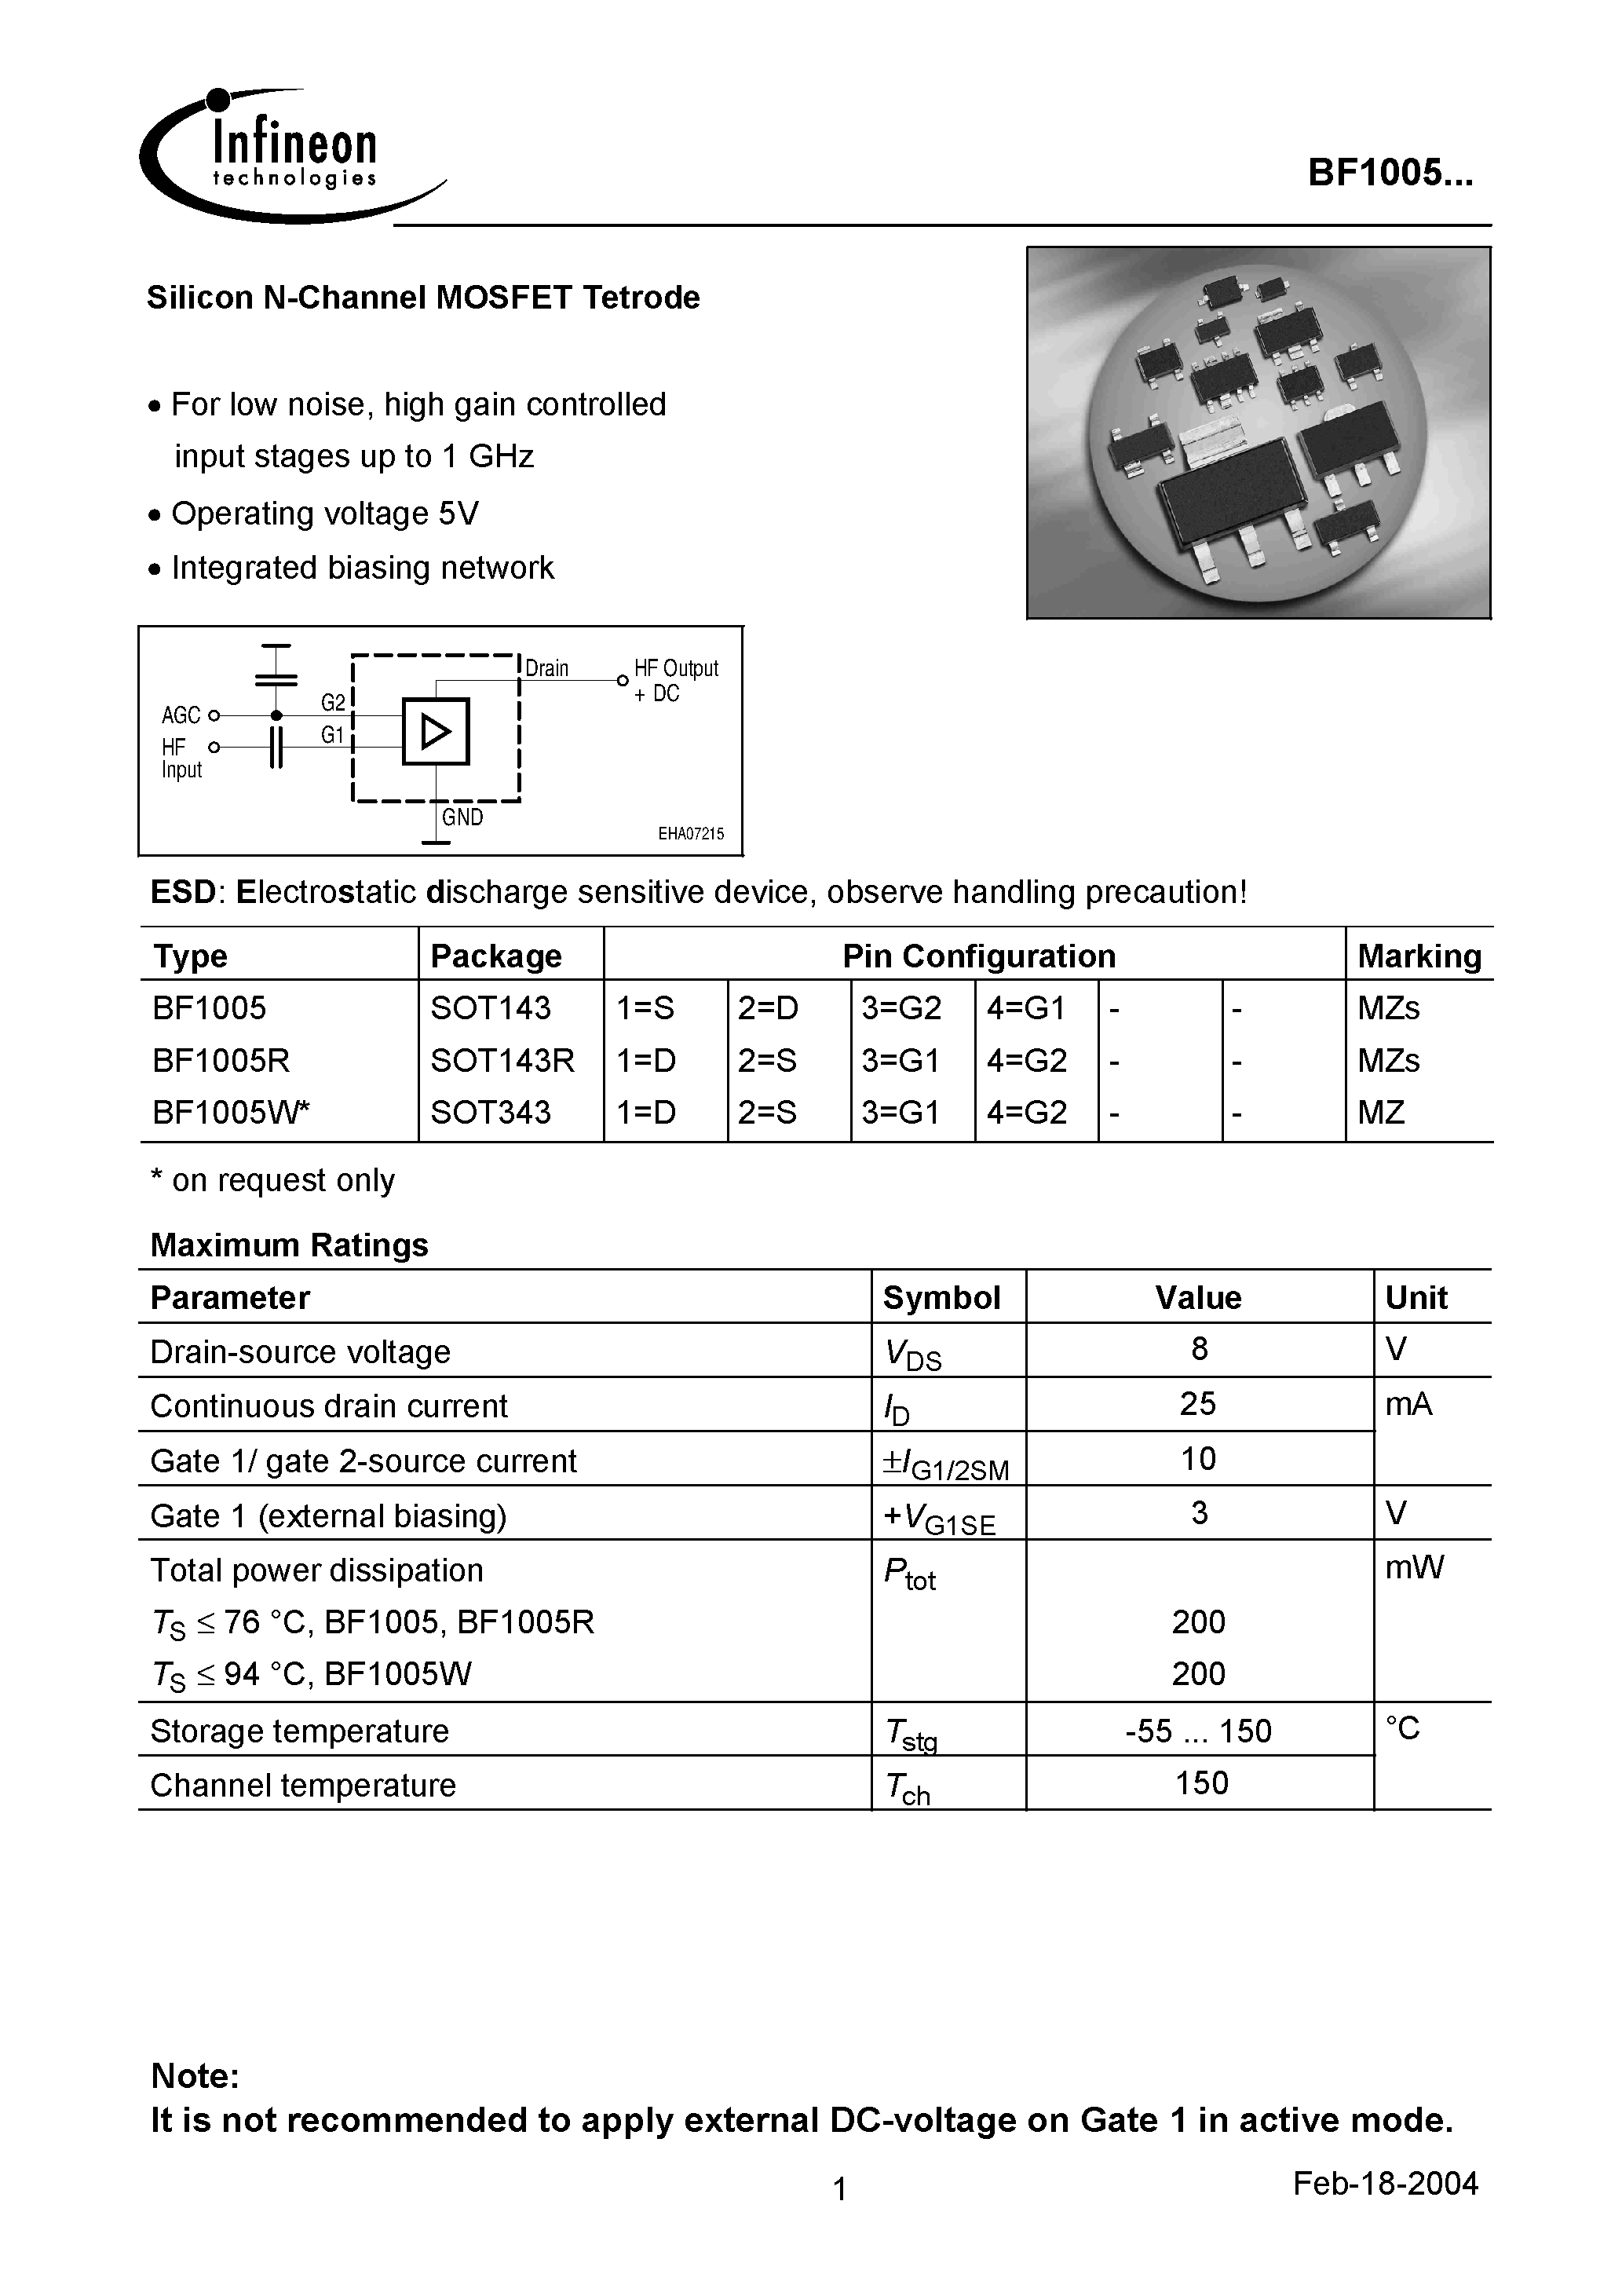 Datasheet BF1005 - Silicon N-Channel MOSFET Tetrode page 1